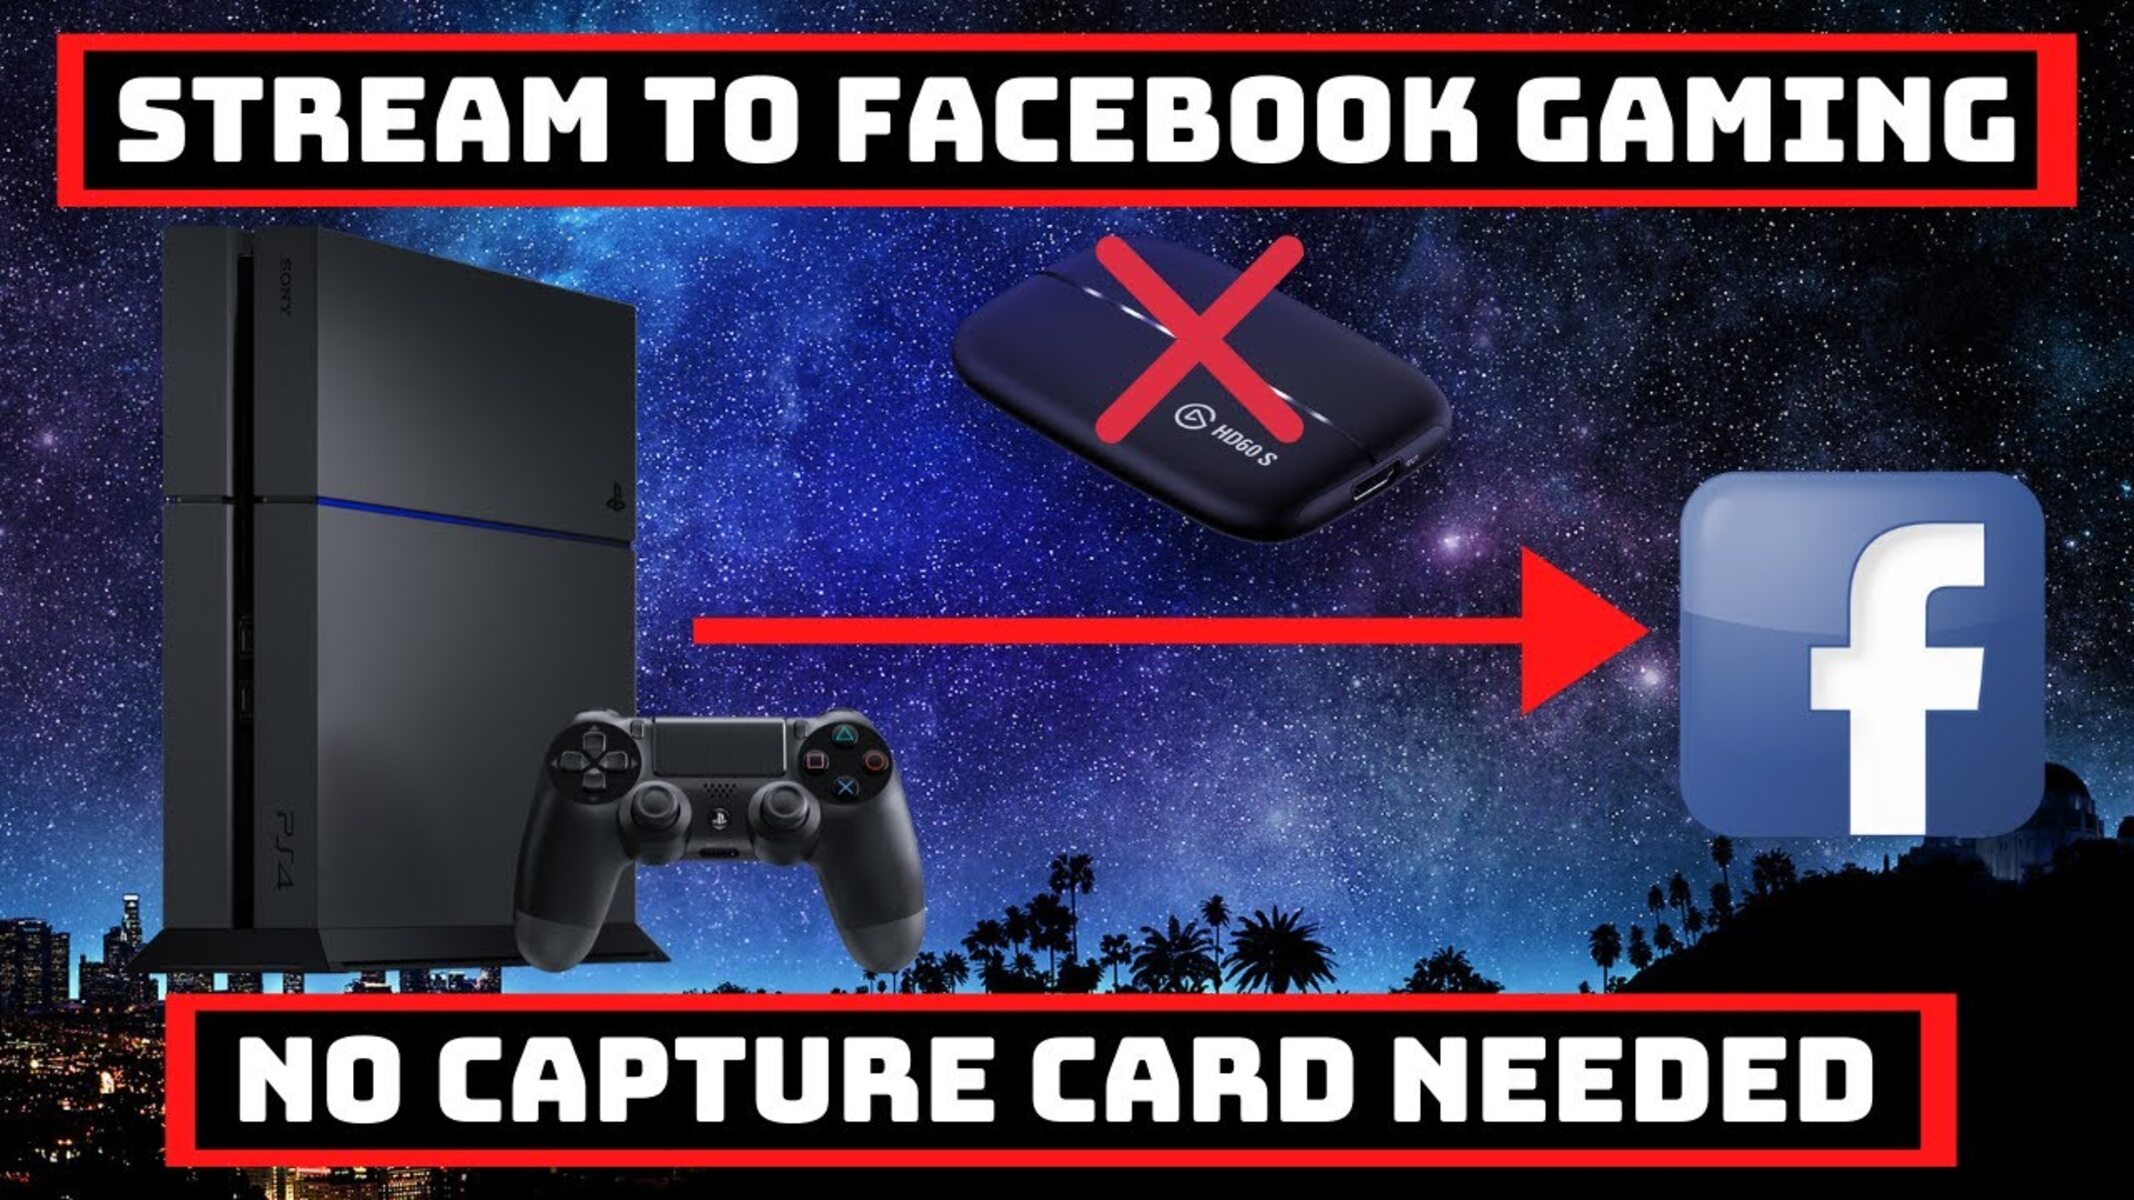 How To Stream PS4 On Facebook Without Capture Card